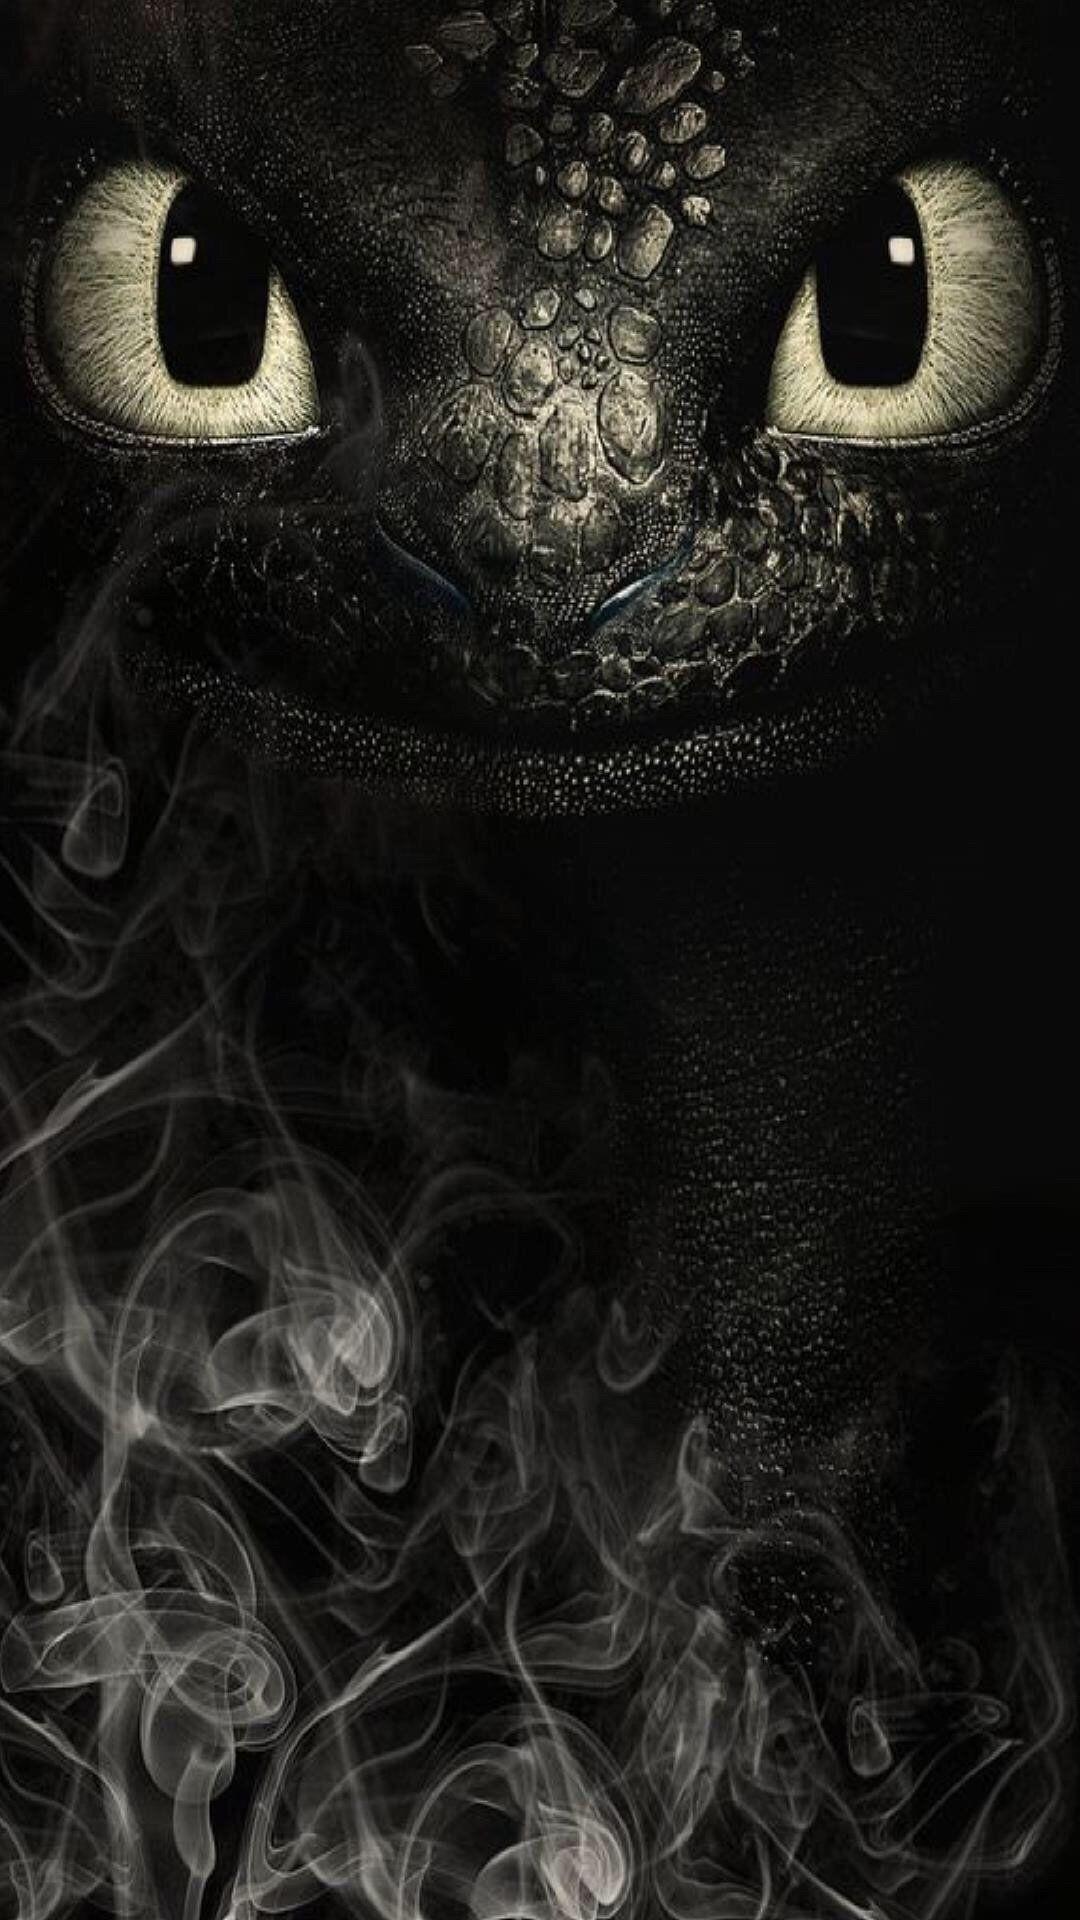 Toothless Phone Wallpaper